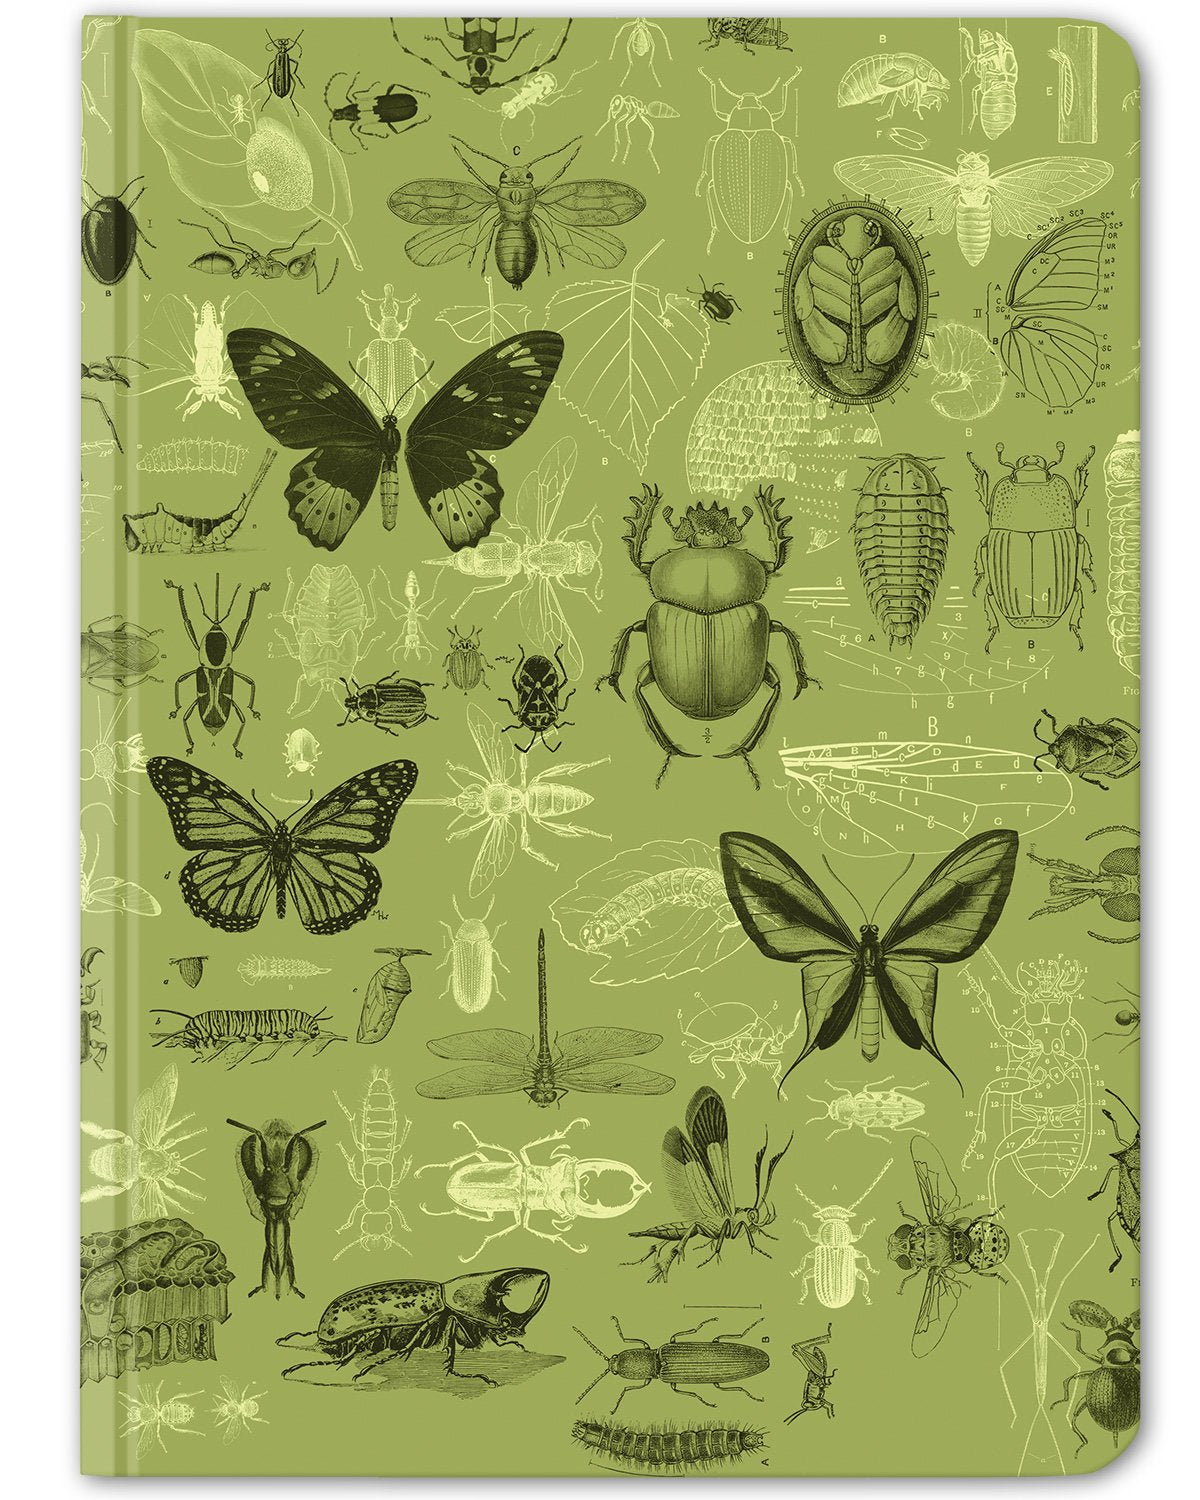 Insects hardcover dot grid journal by Cognitive Surplus, leafy green, 100% recycled paper